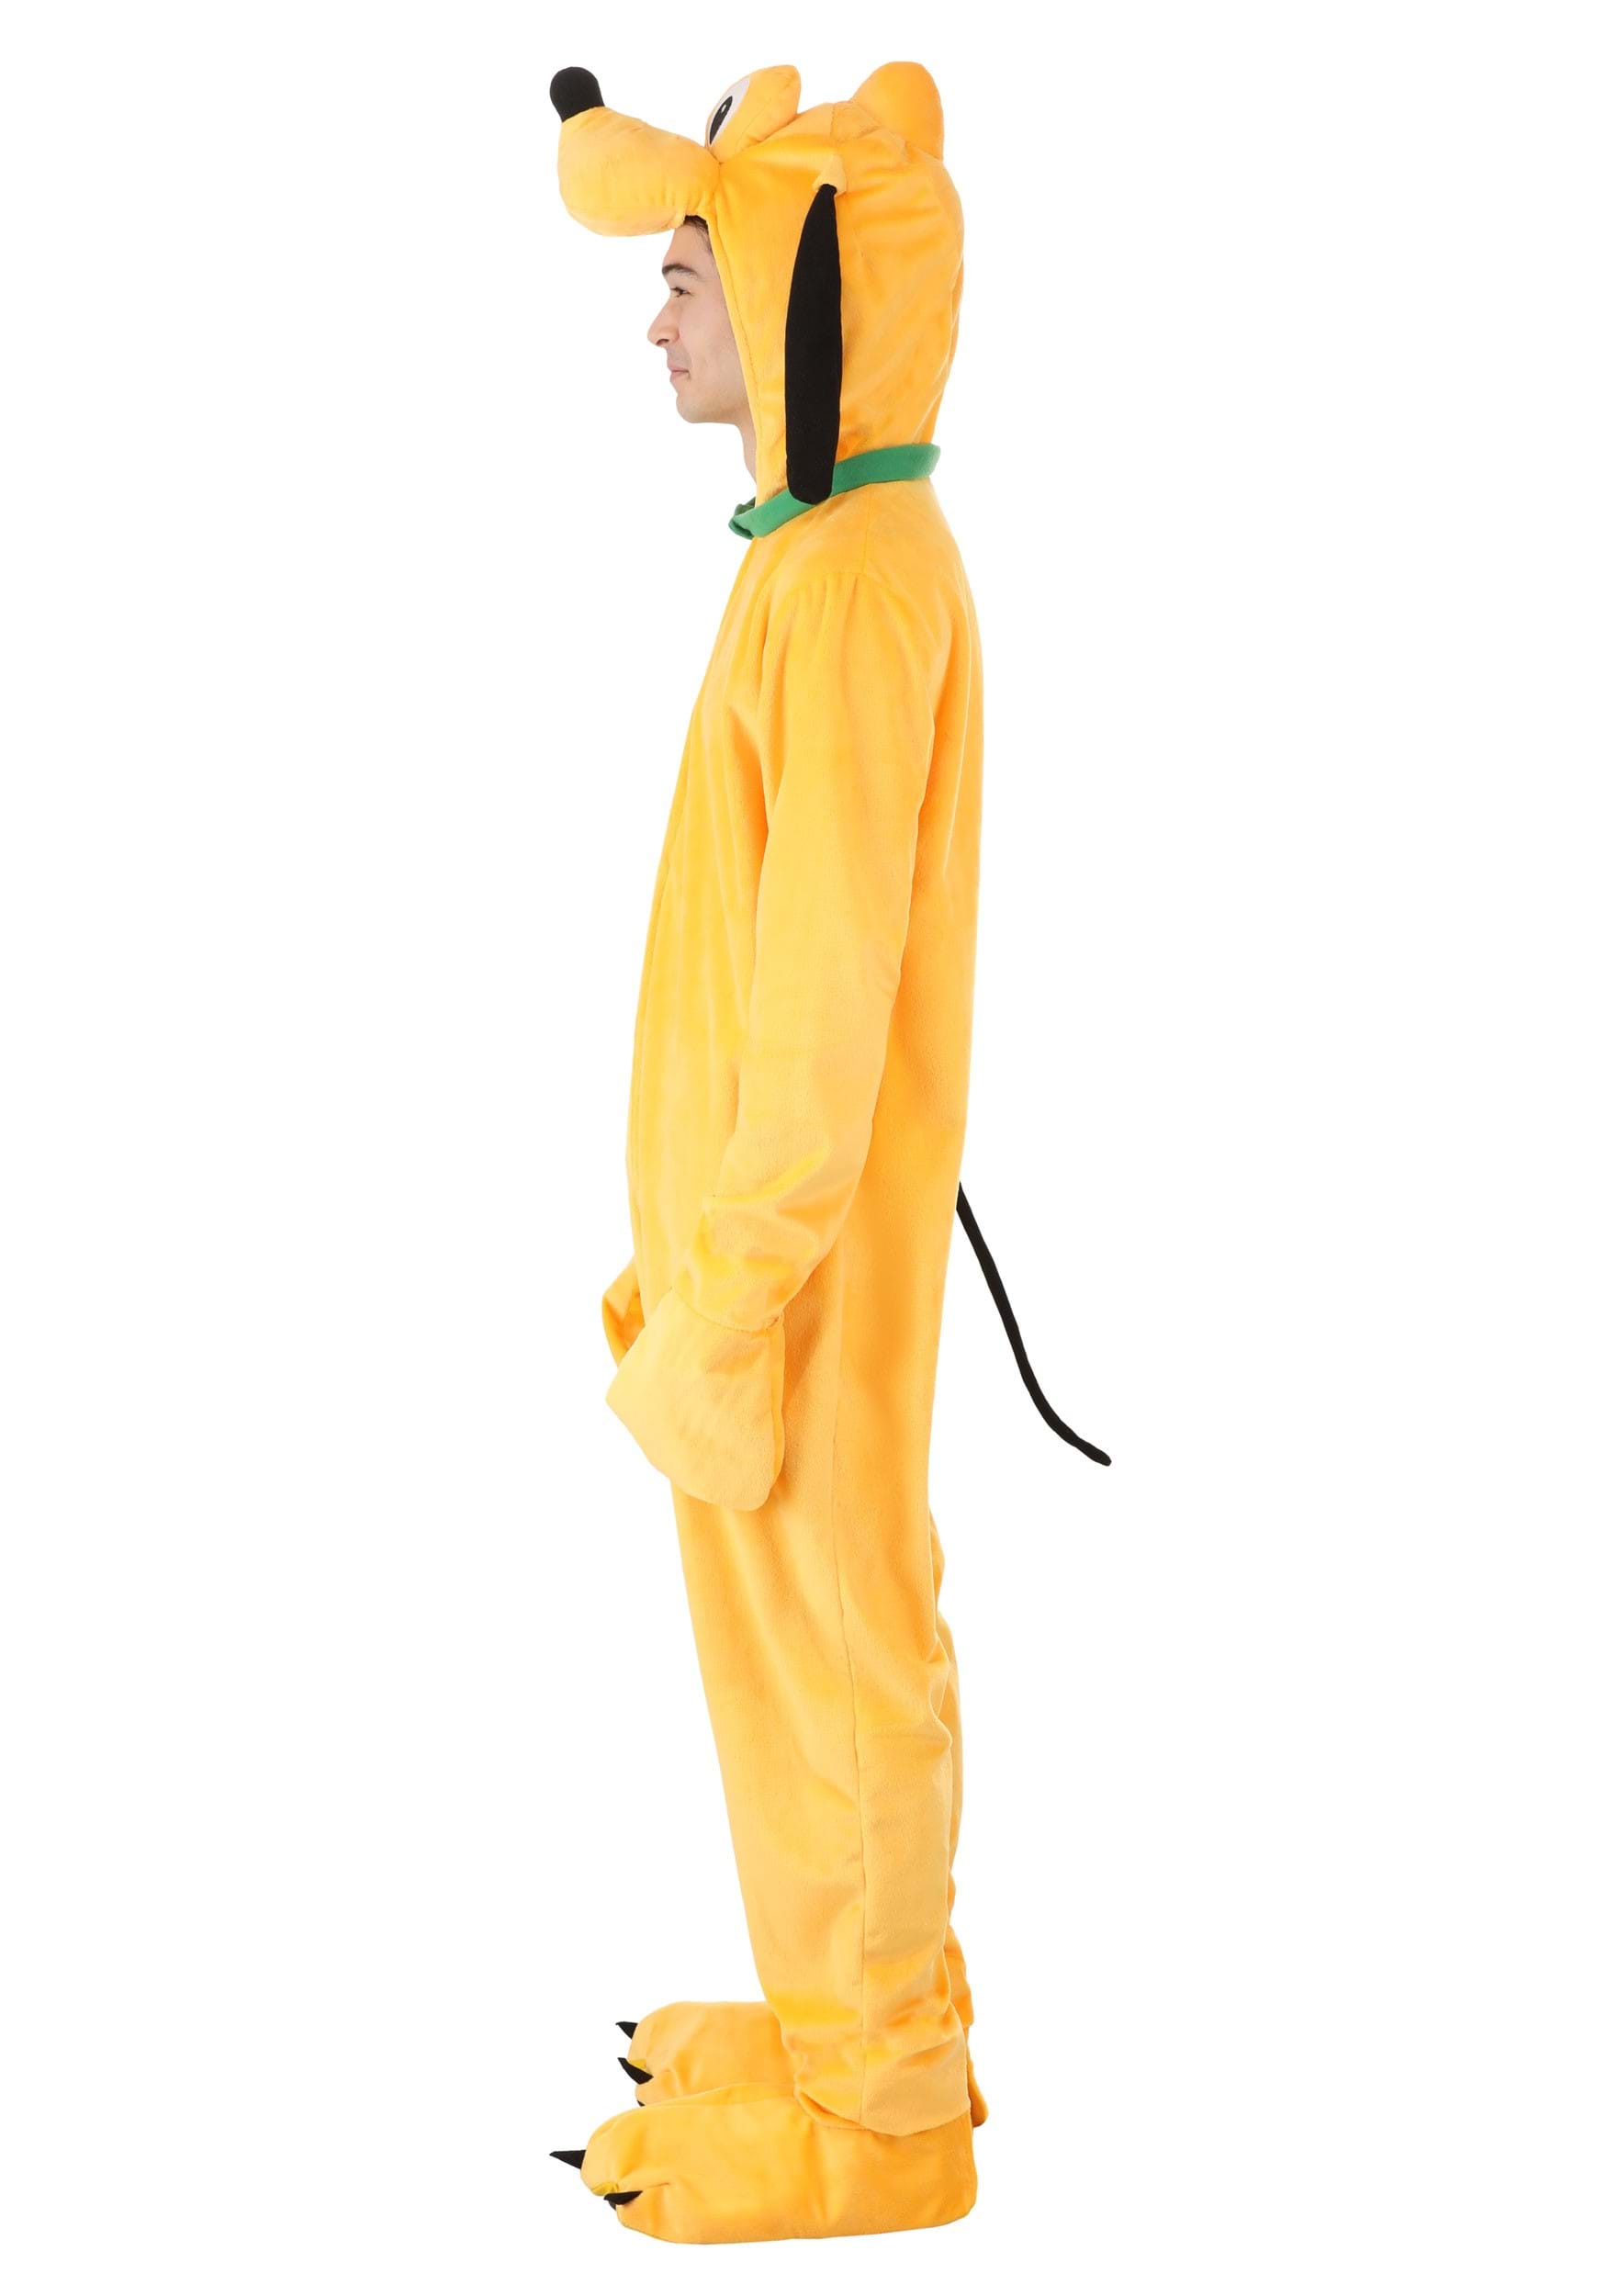 Disney Pluto Costume for Adults